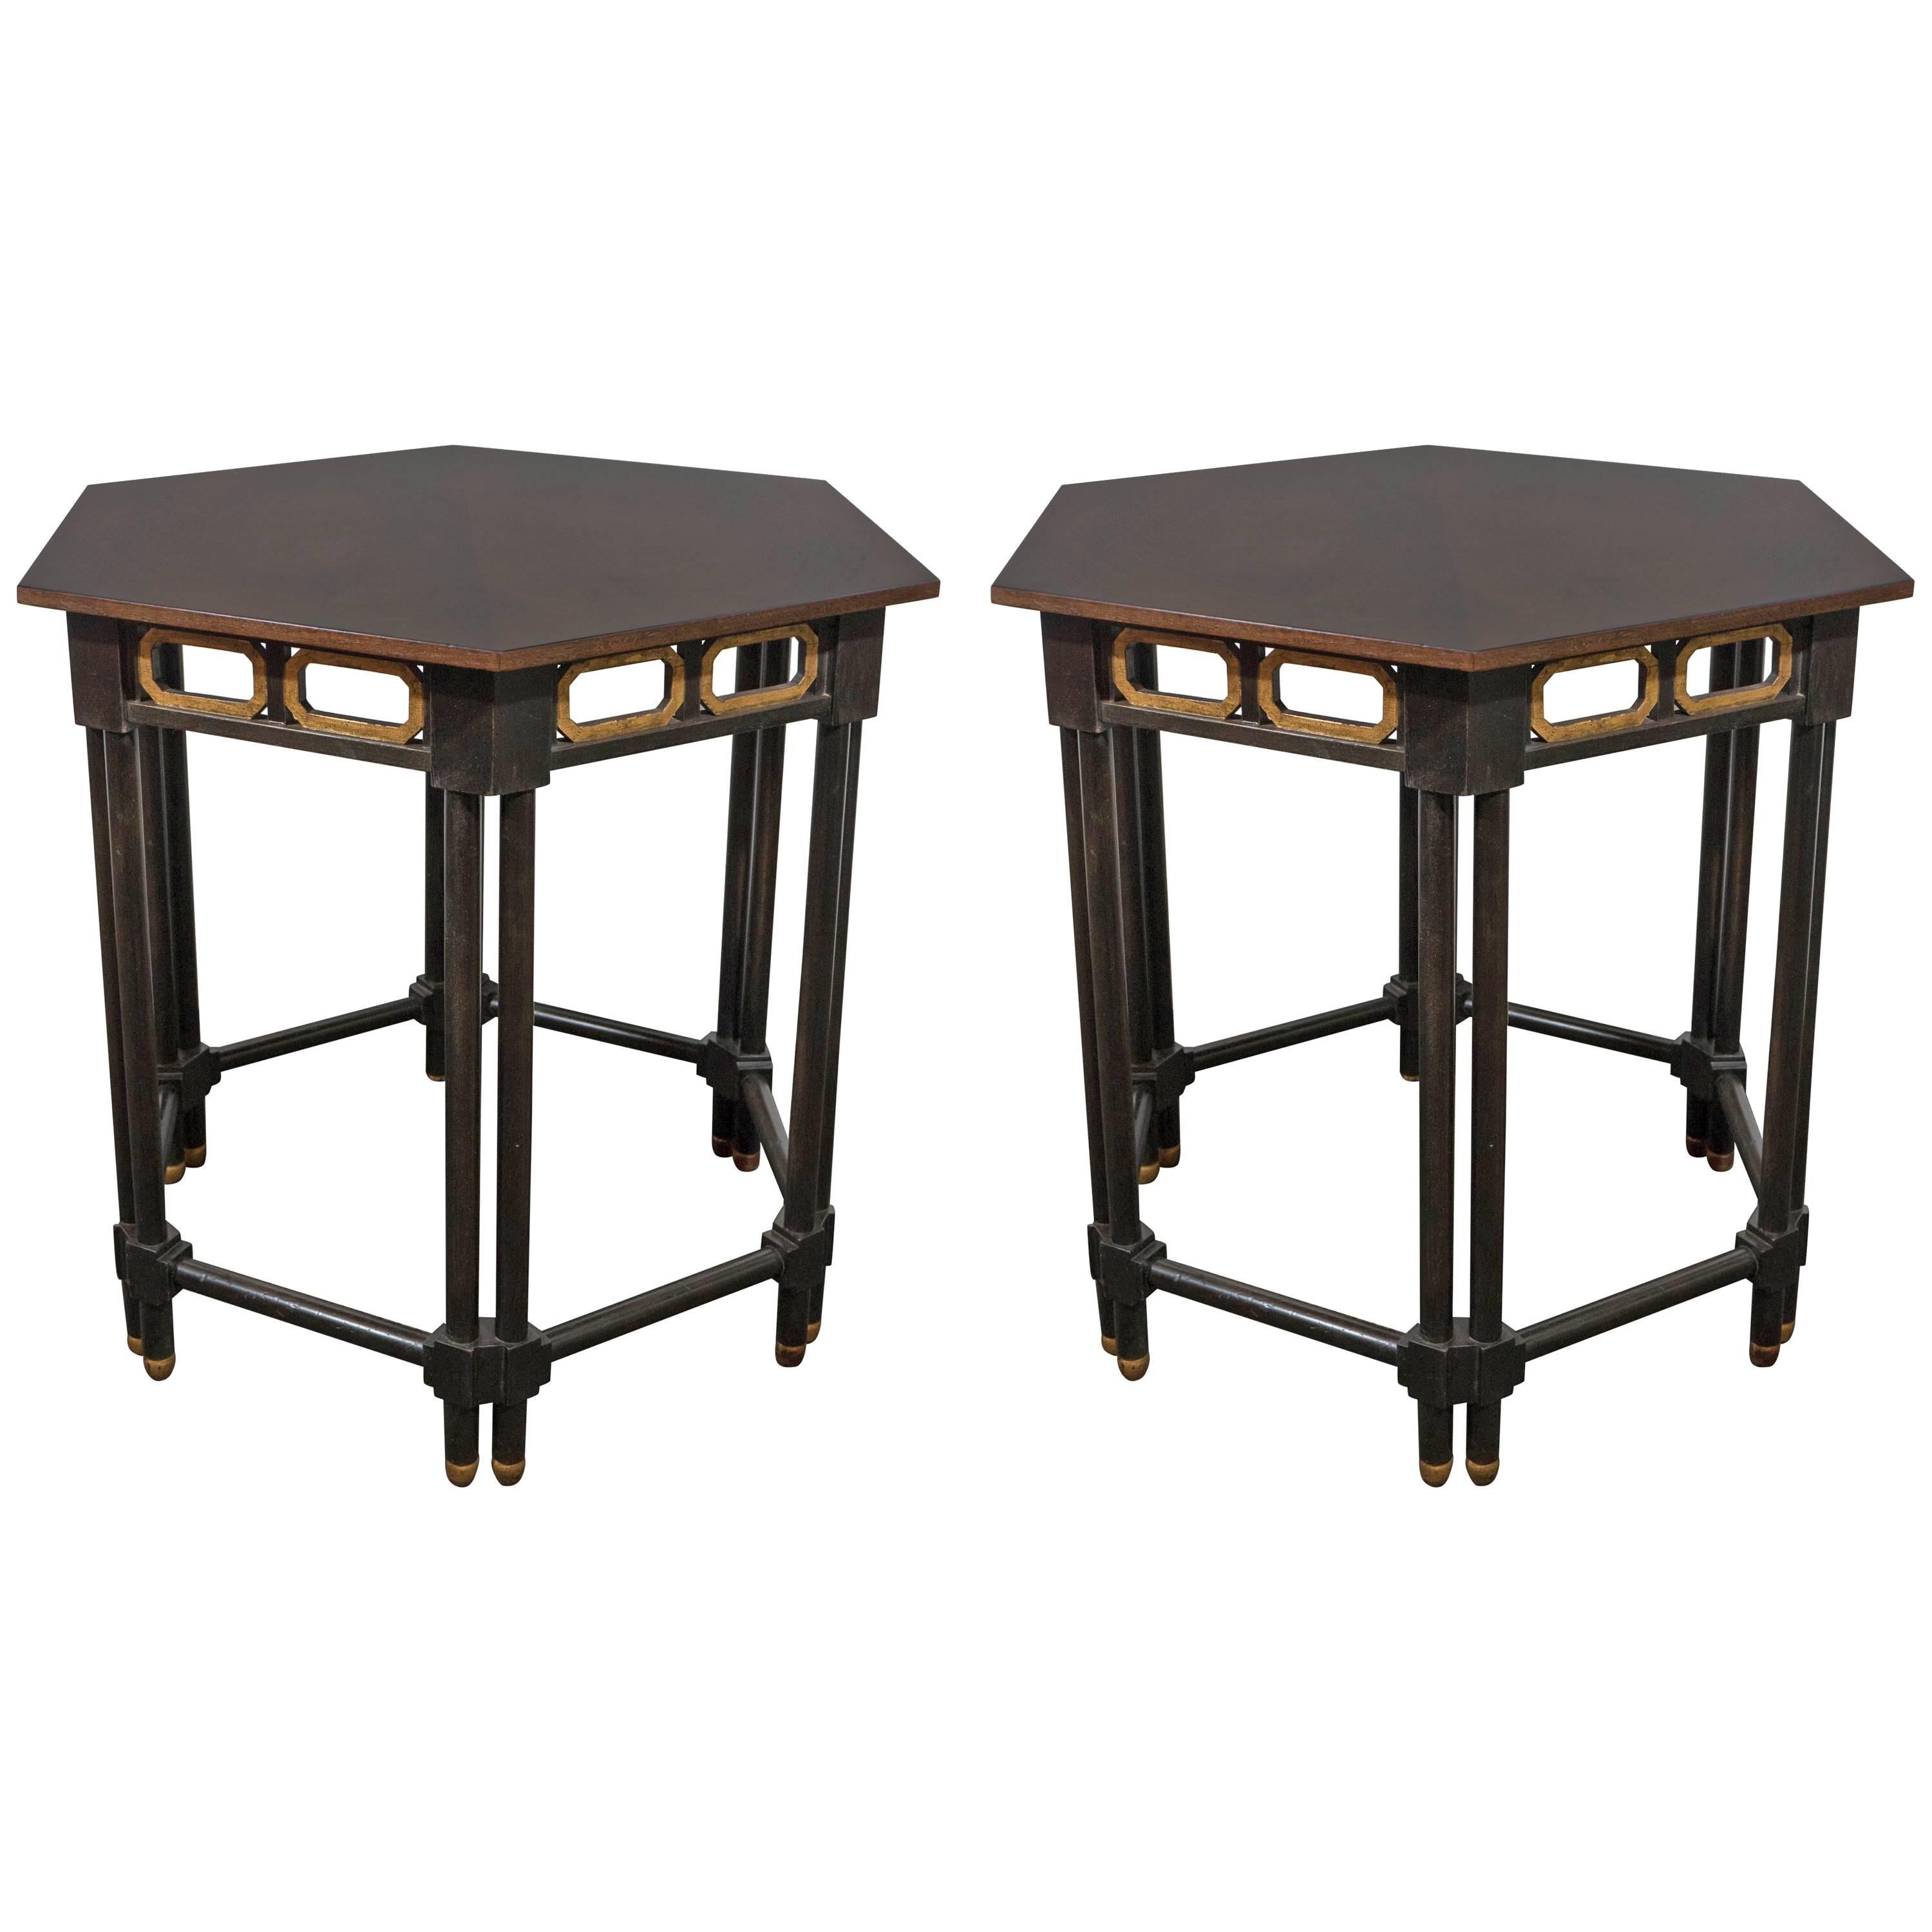 Pair of Moorish Style Hexagonal Side Tables by Baker Furniture